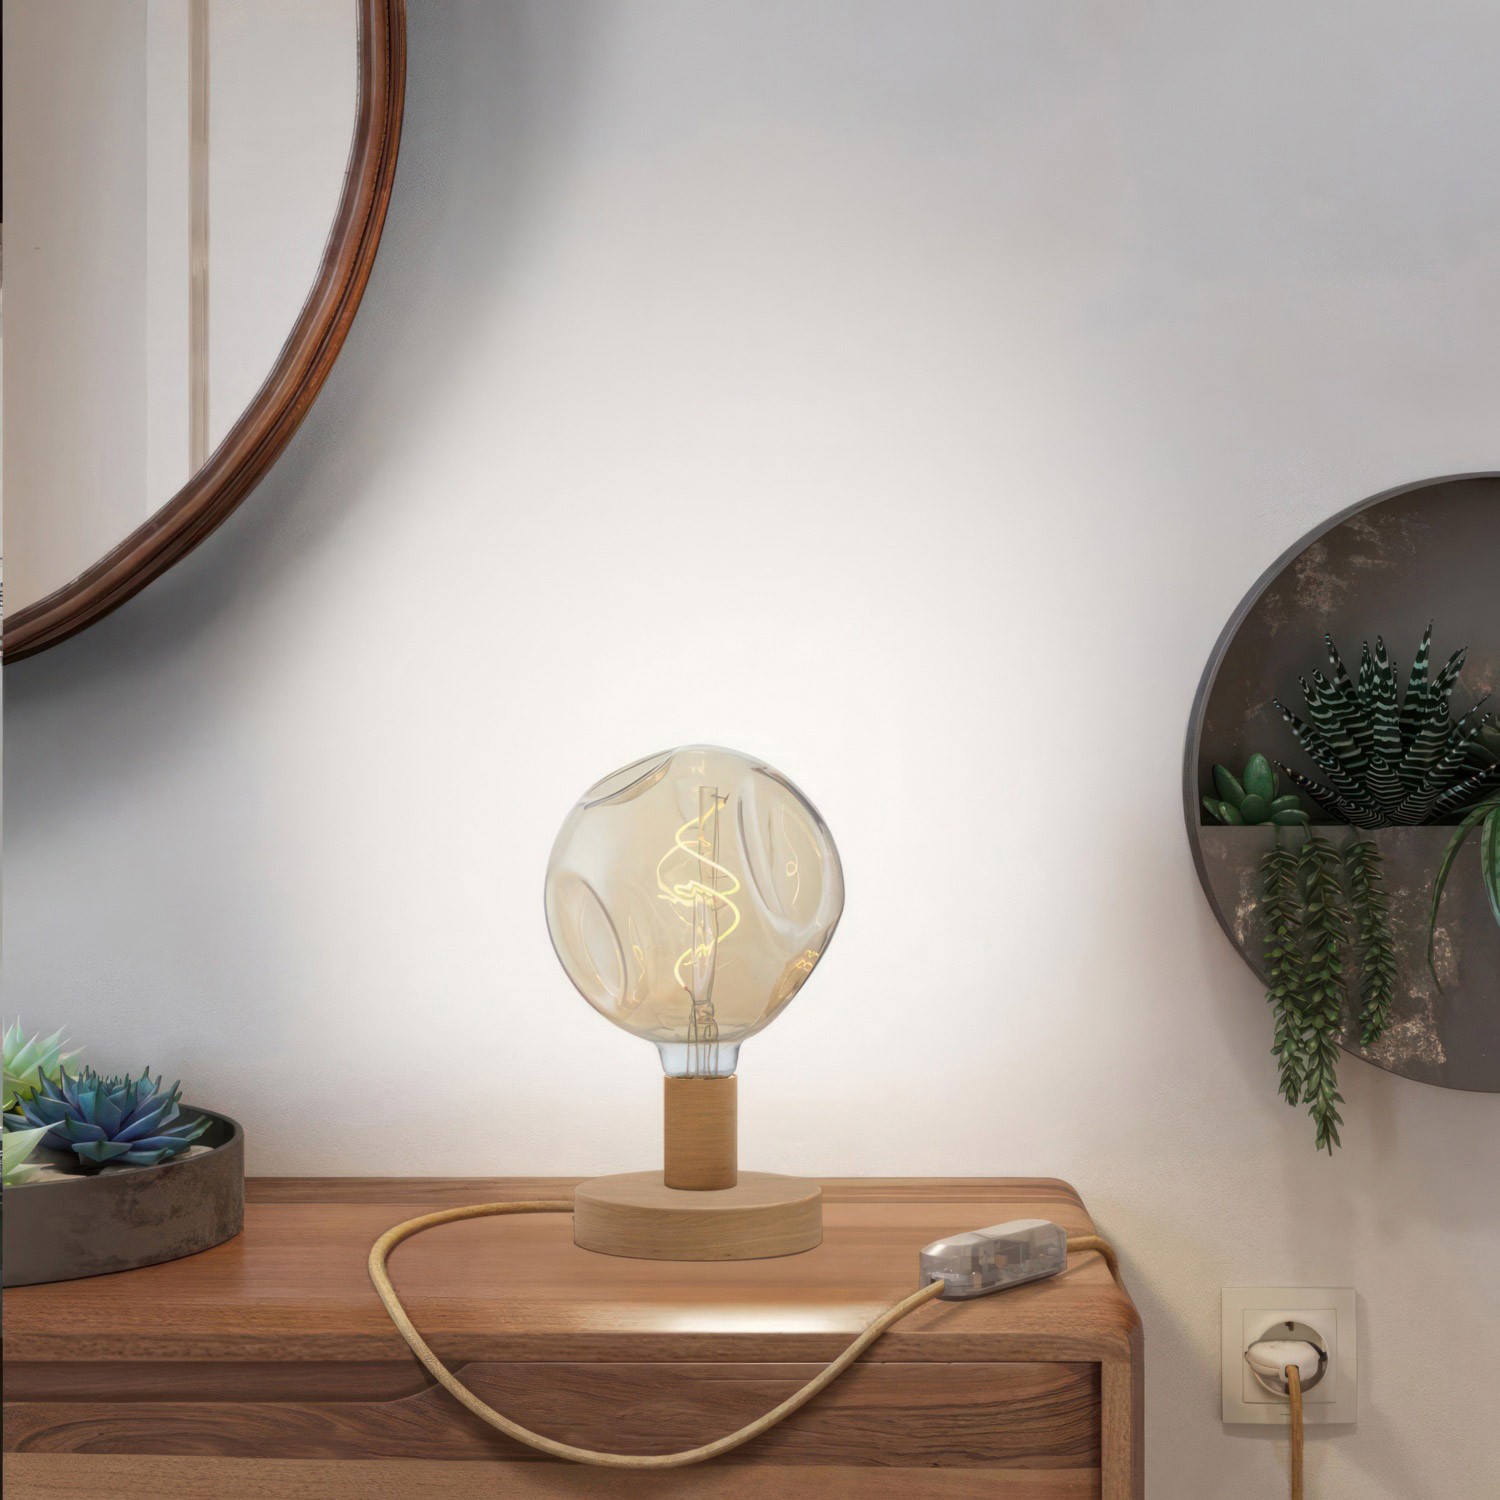 Posaluce Bumped Wooden Table Lamp with two-pin plug